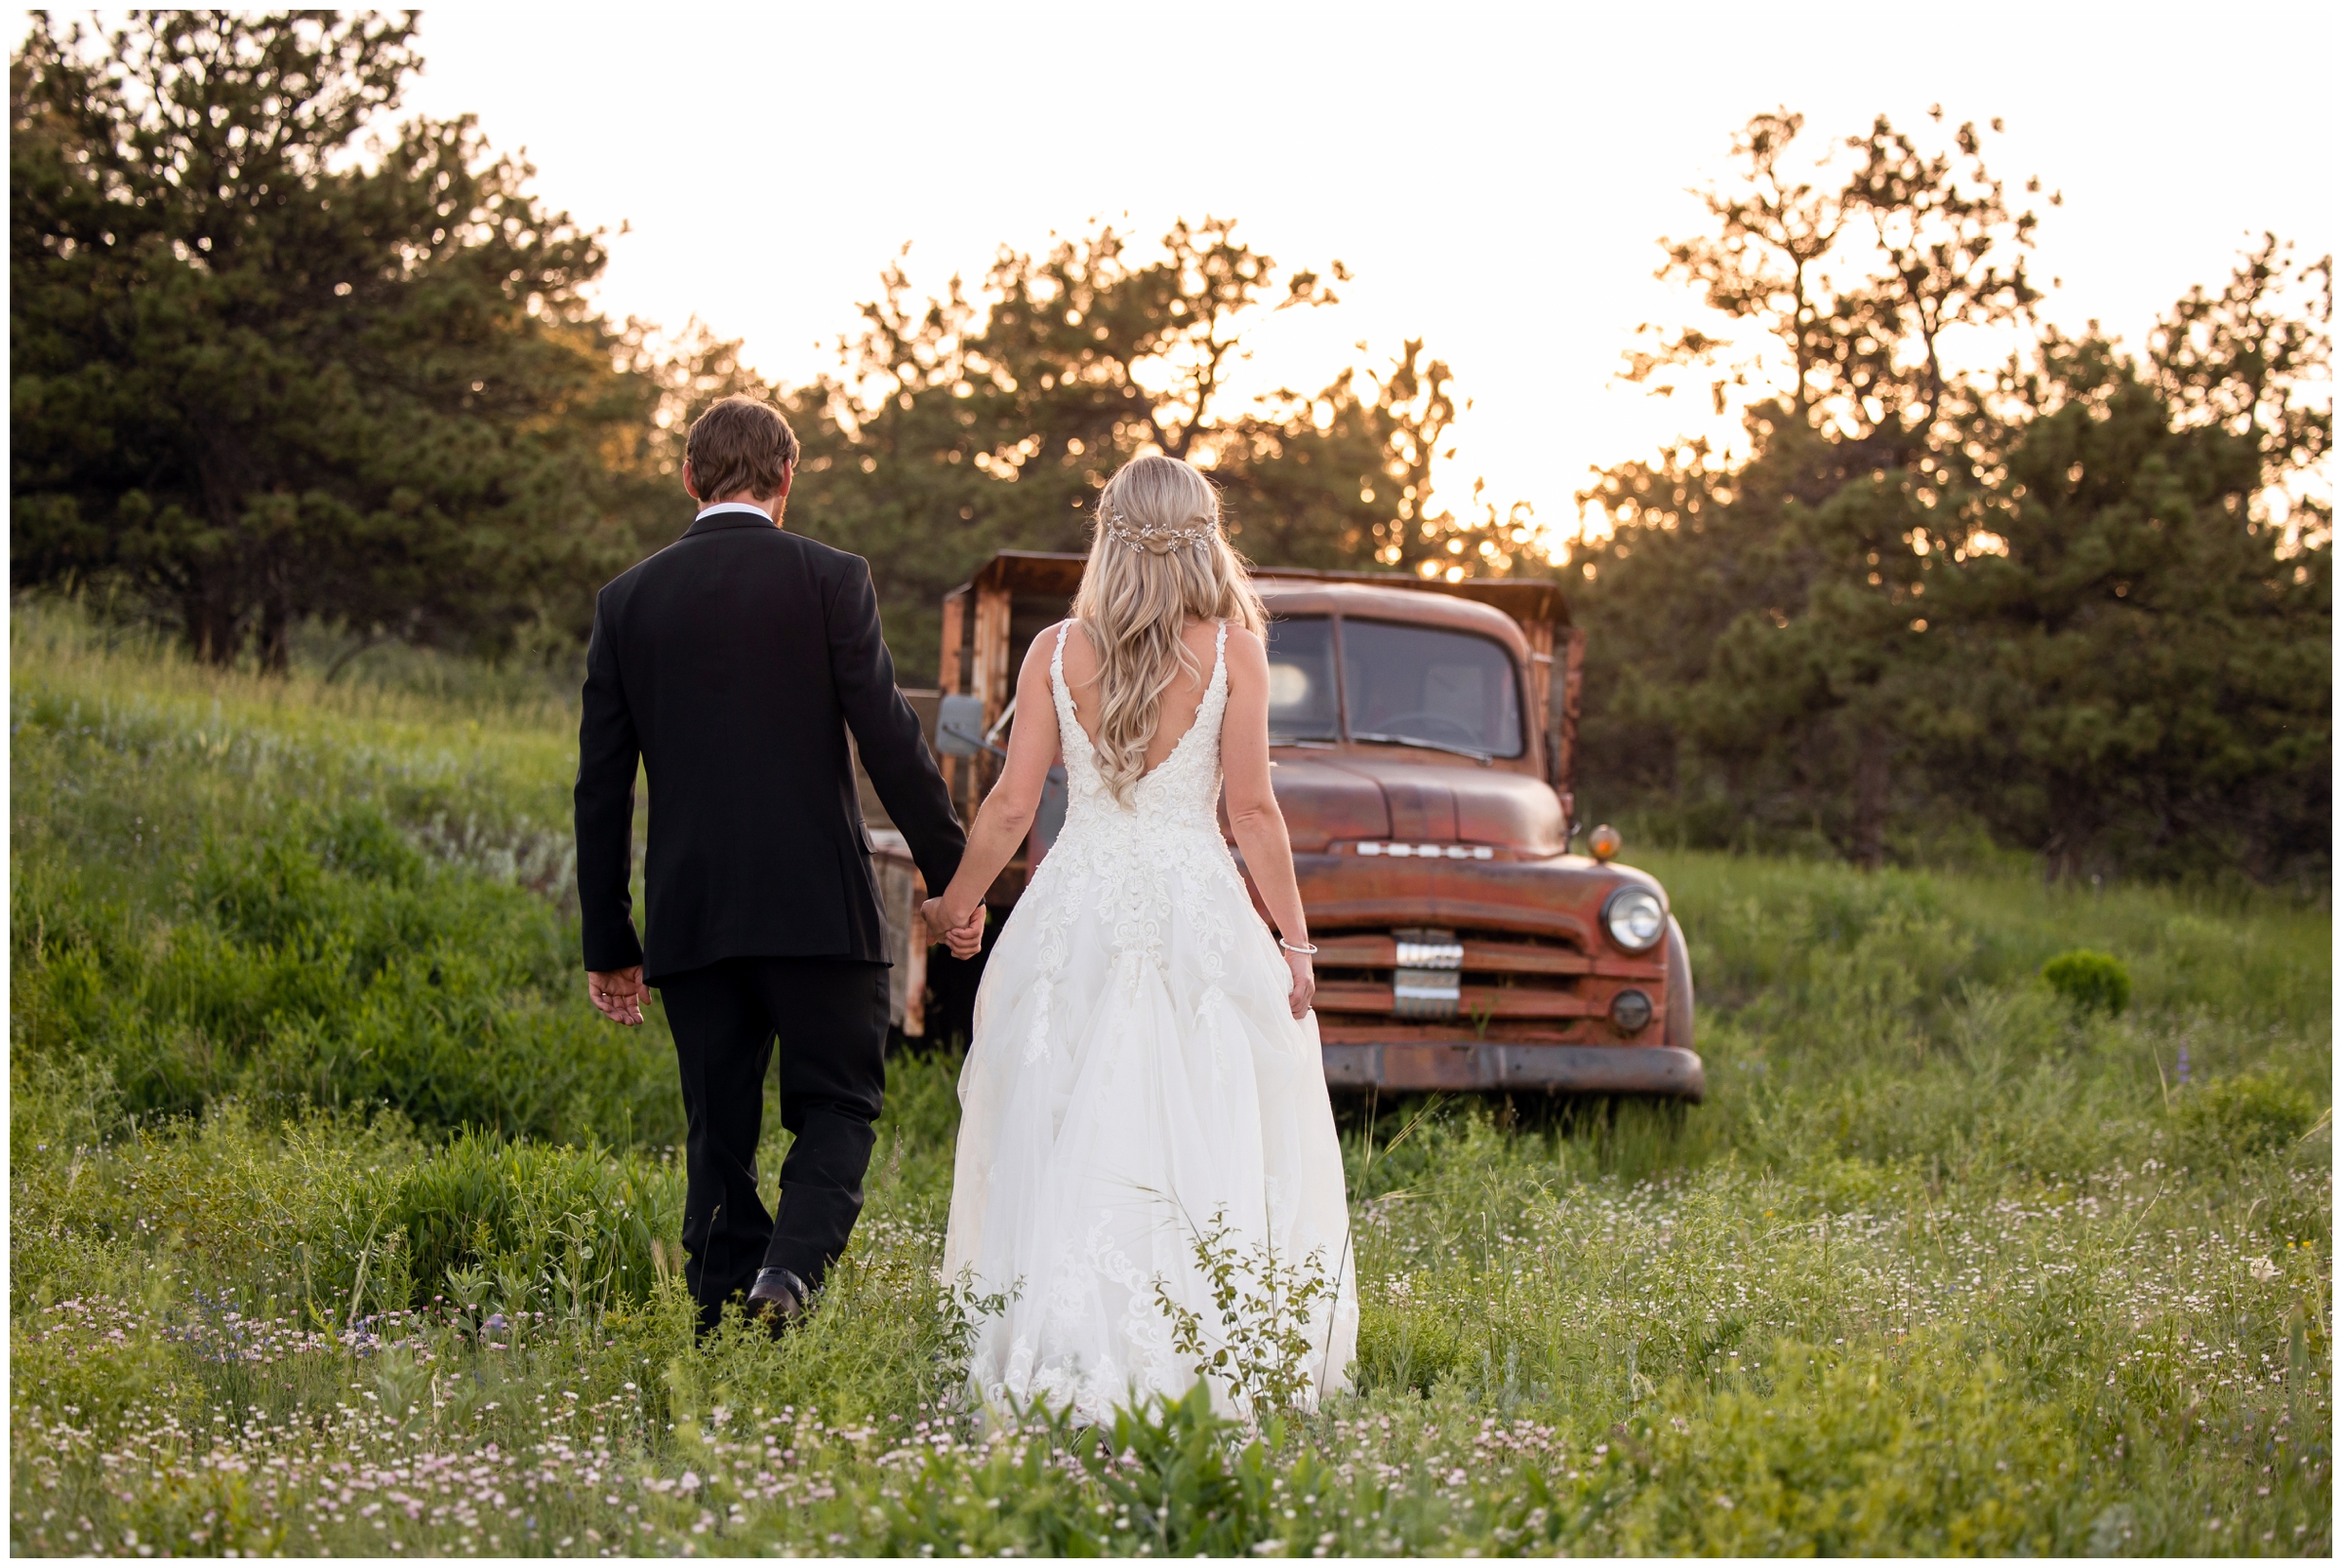 sunset wedding portraits at Lionscrest Manor by Lyons photographer Plum Pretty Photography 